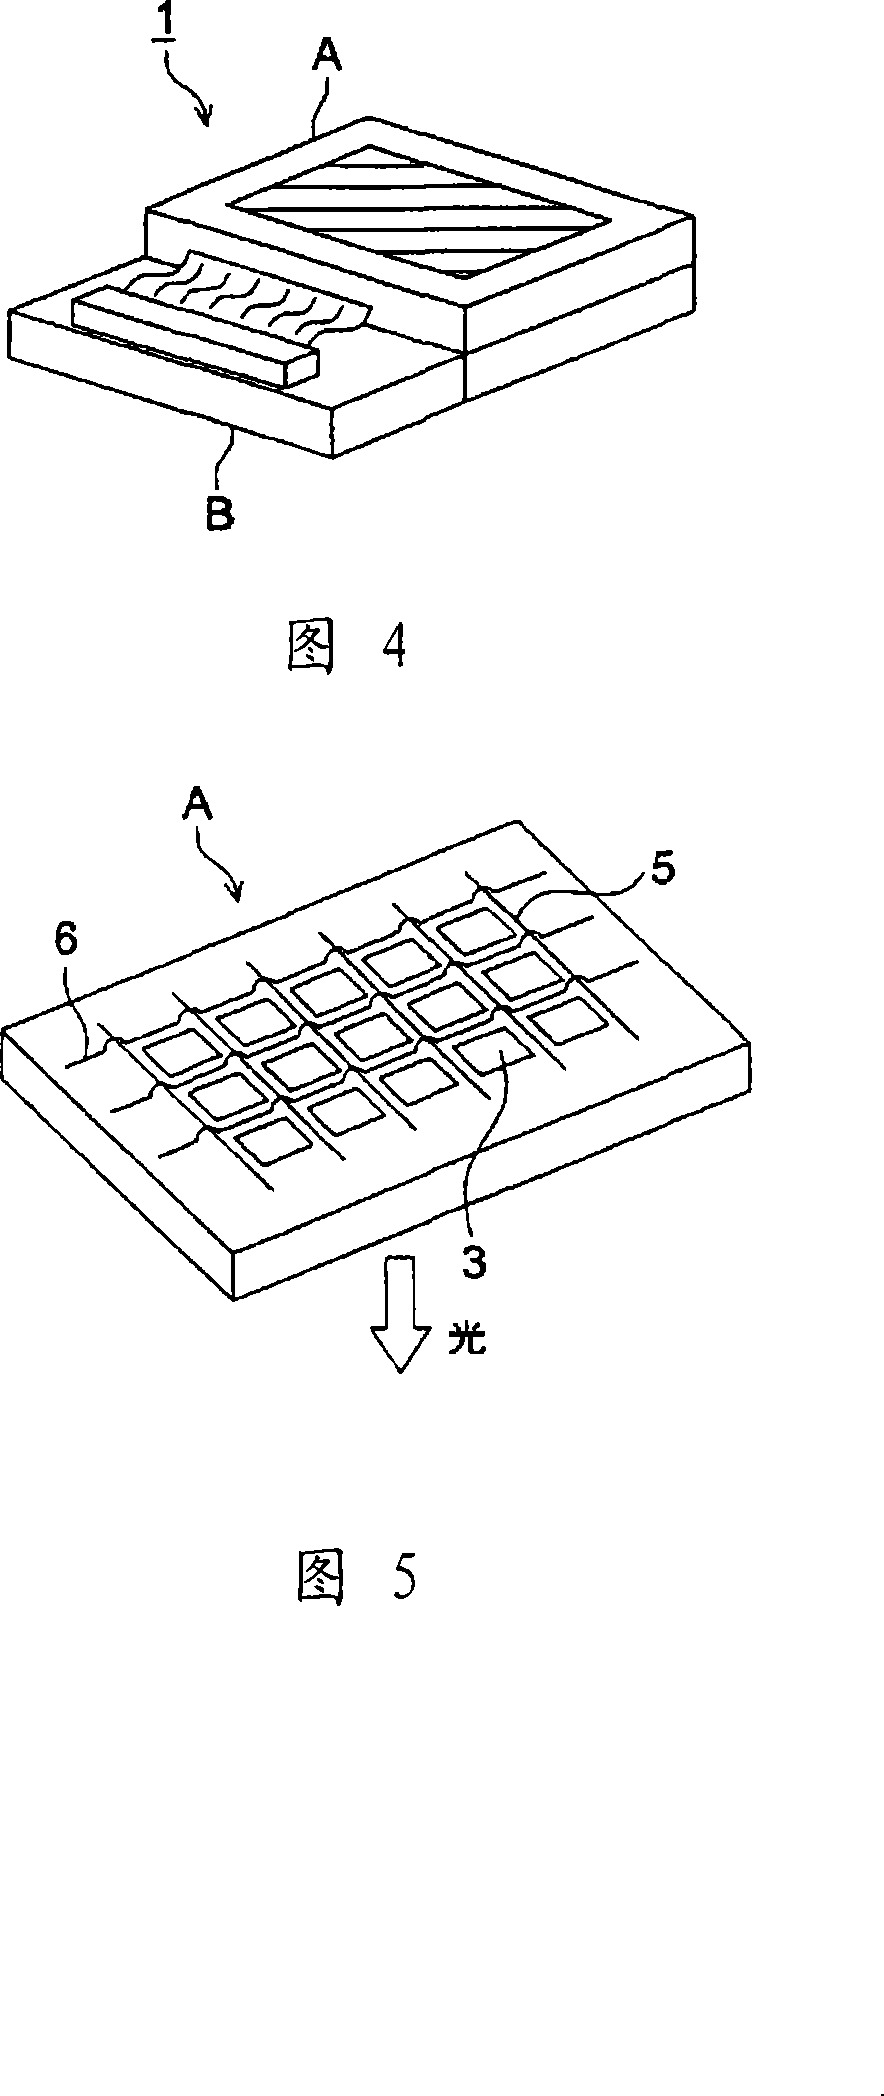 Organic electroluminescent element, display device, and lighting device